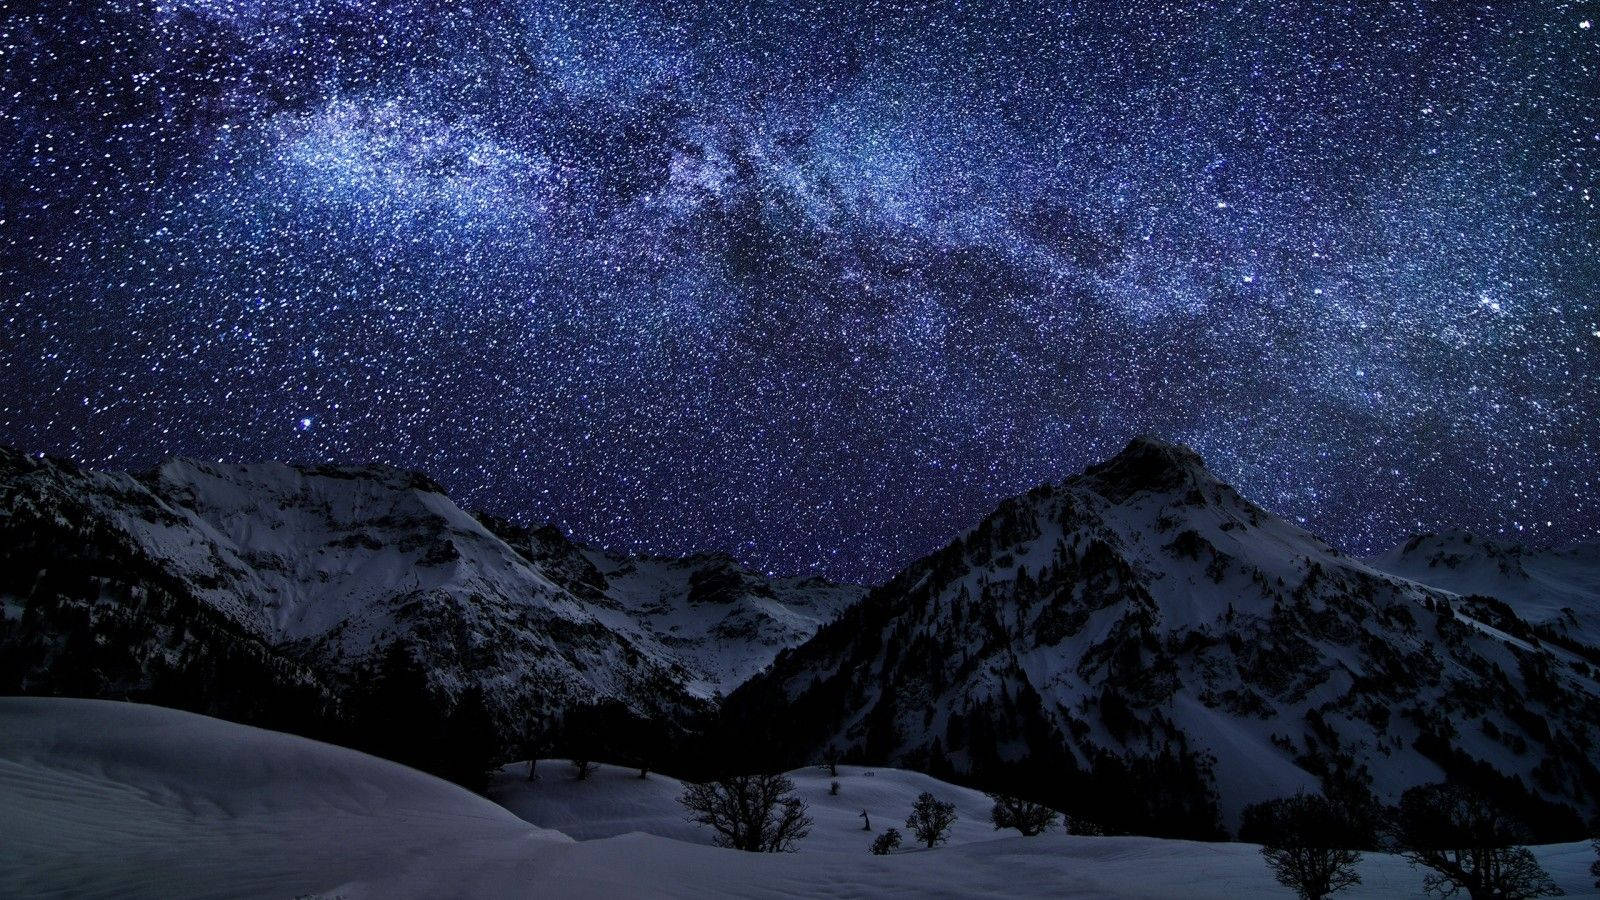 Snowy Mountain And Stars Wallpaper